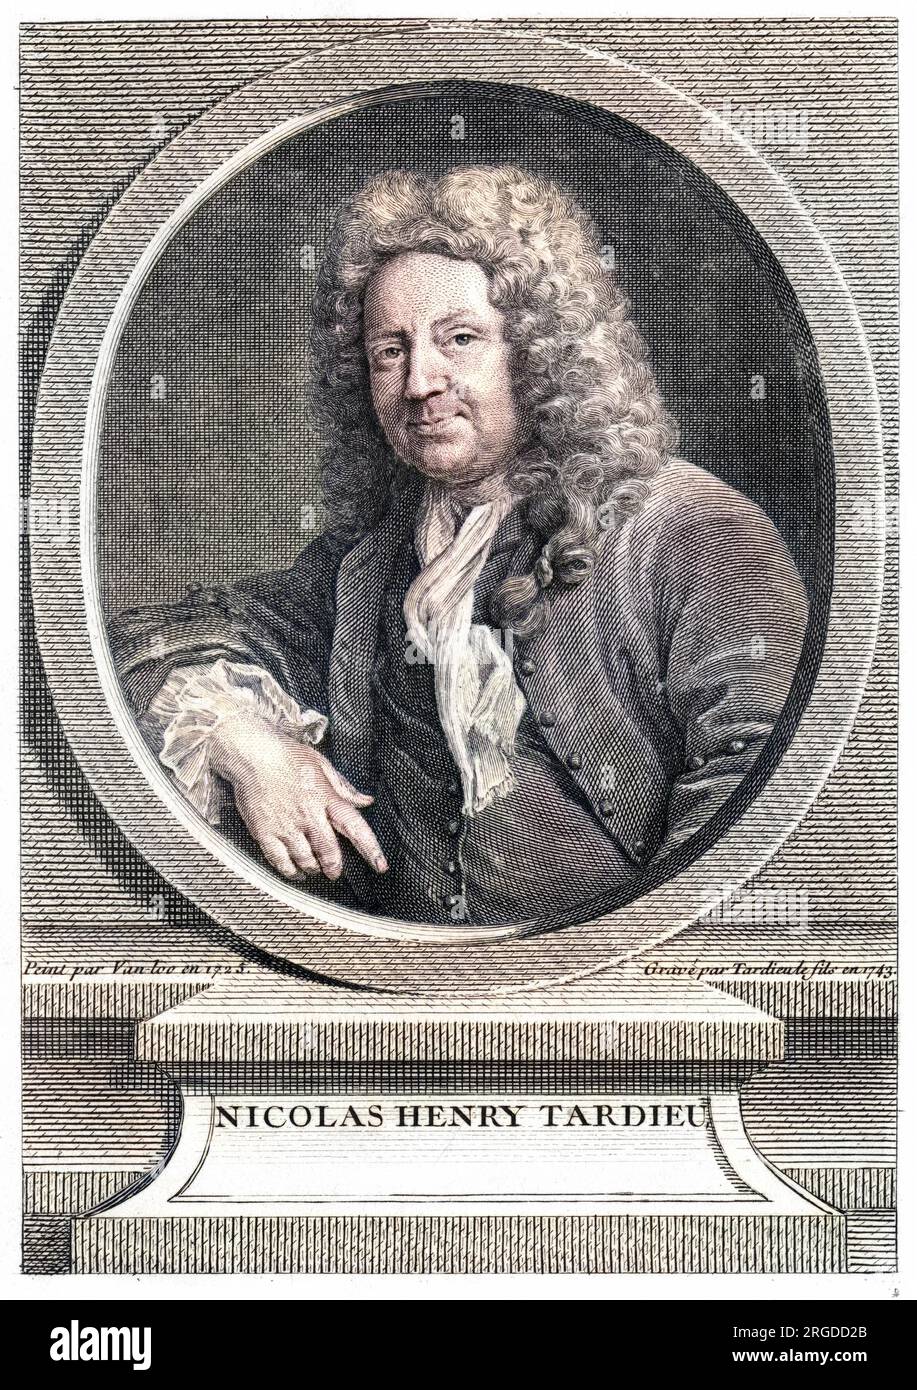 NICOLAS TARDIEU French engraver, one of a famous family : this was engraved by his son, and we have many finely engraved portraits by them. Stock Photo